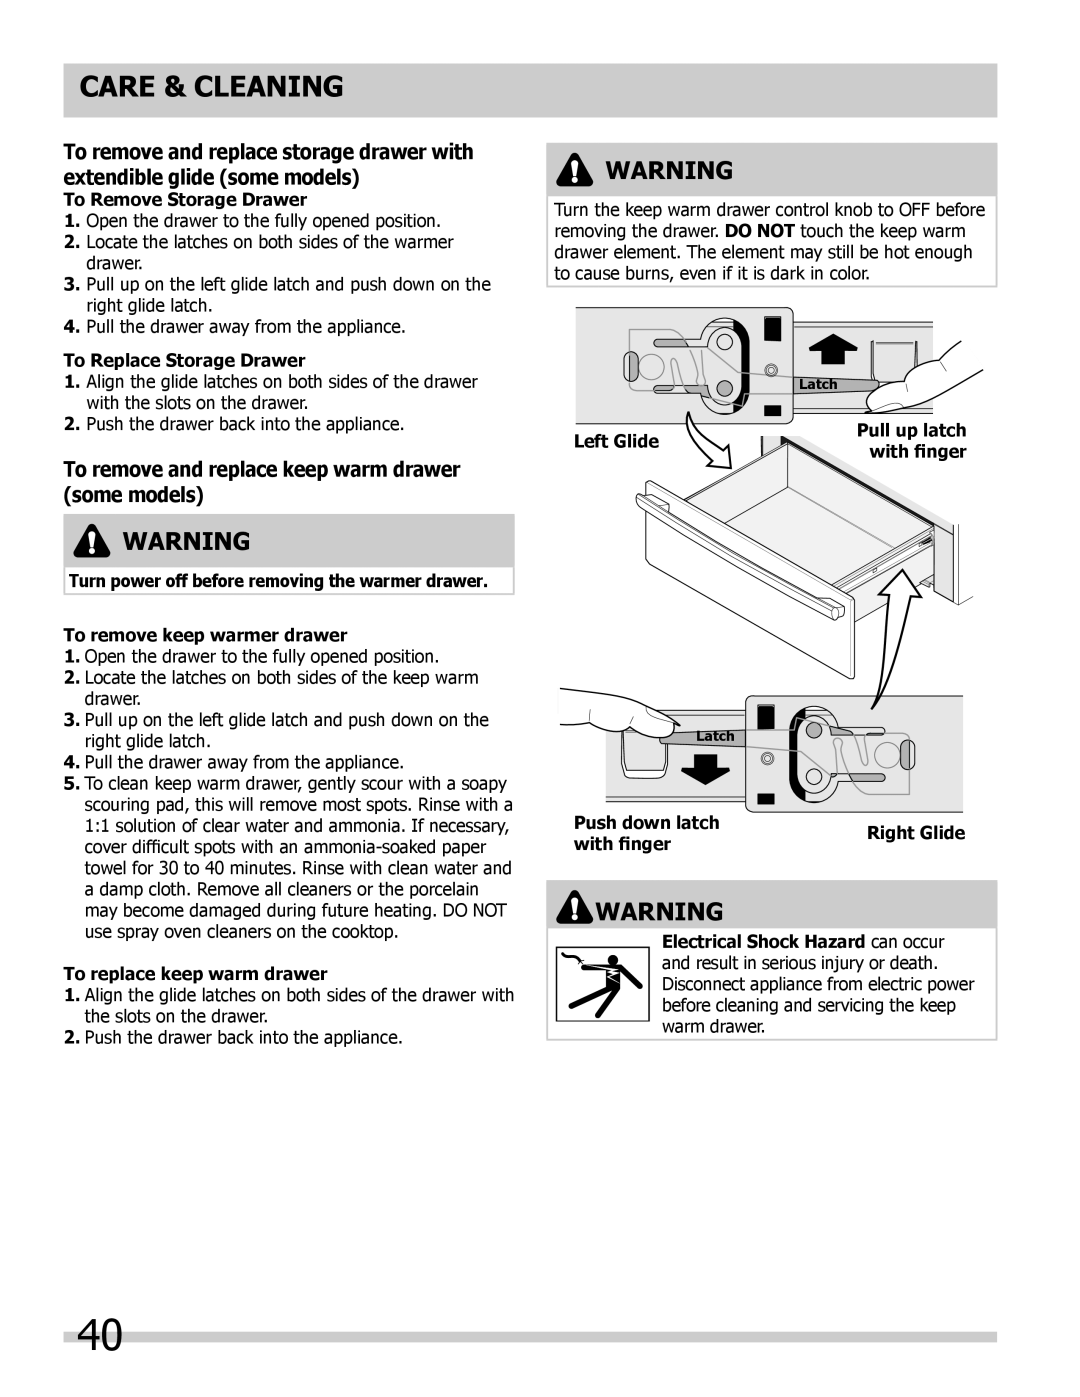 Frigidaire 318205804 manual To remove and replace keep warm drawer some models, To Remove Storage Drawer, Left Glide 